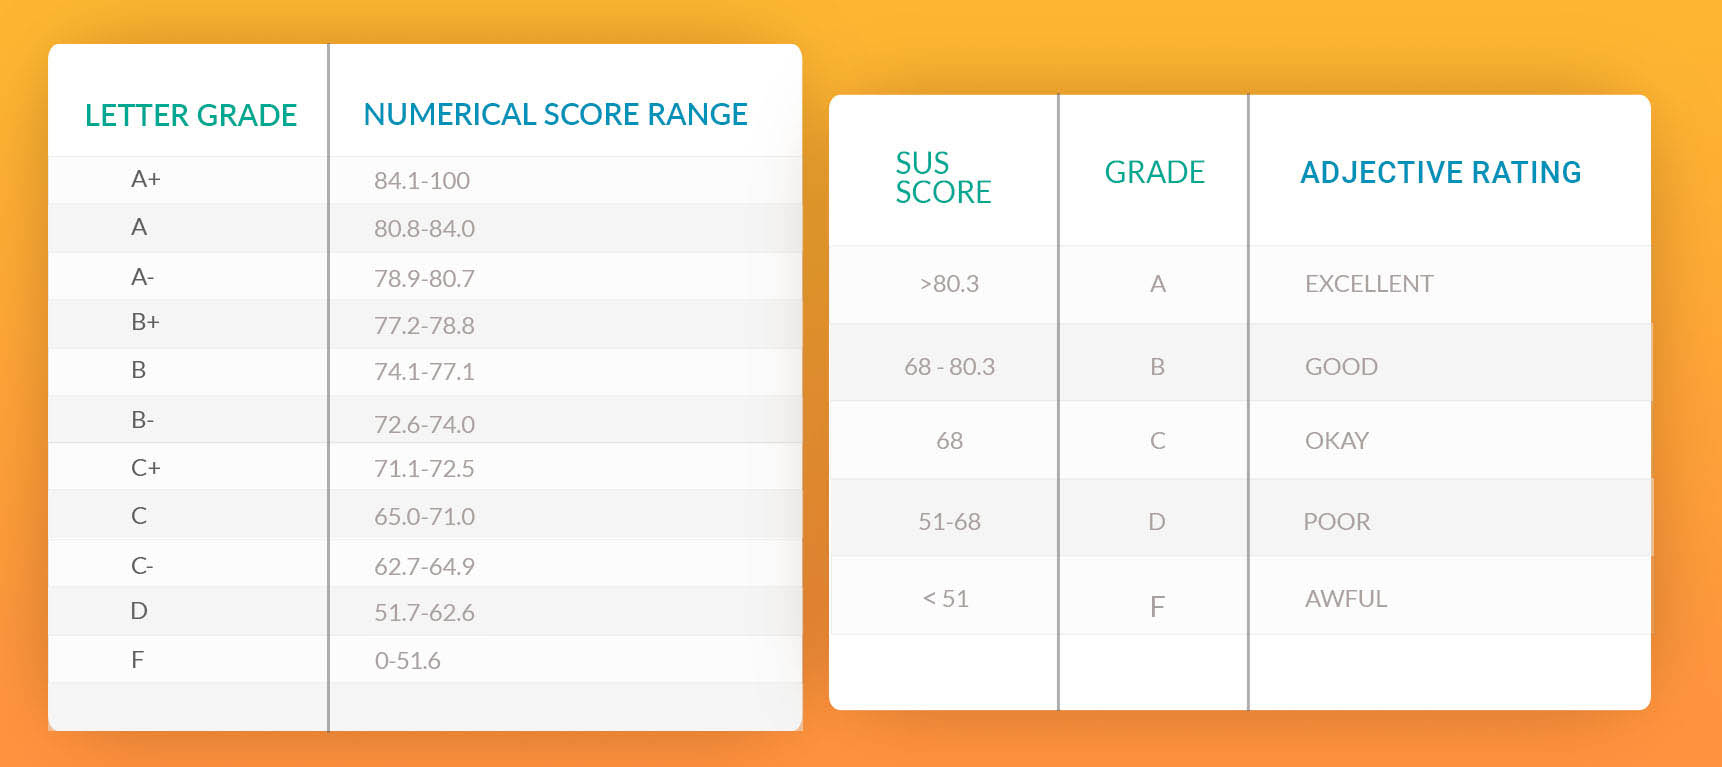 Grading scale interpretation and adjective rating of SUS scores